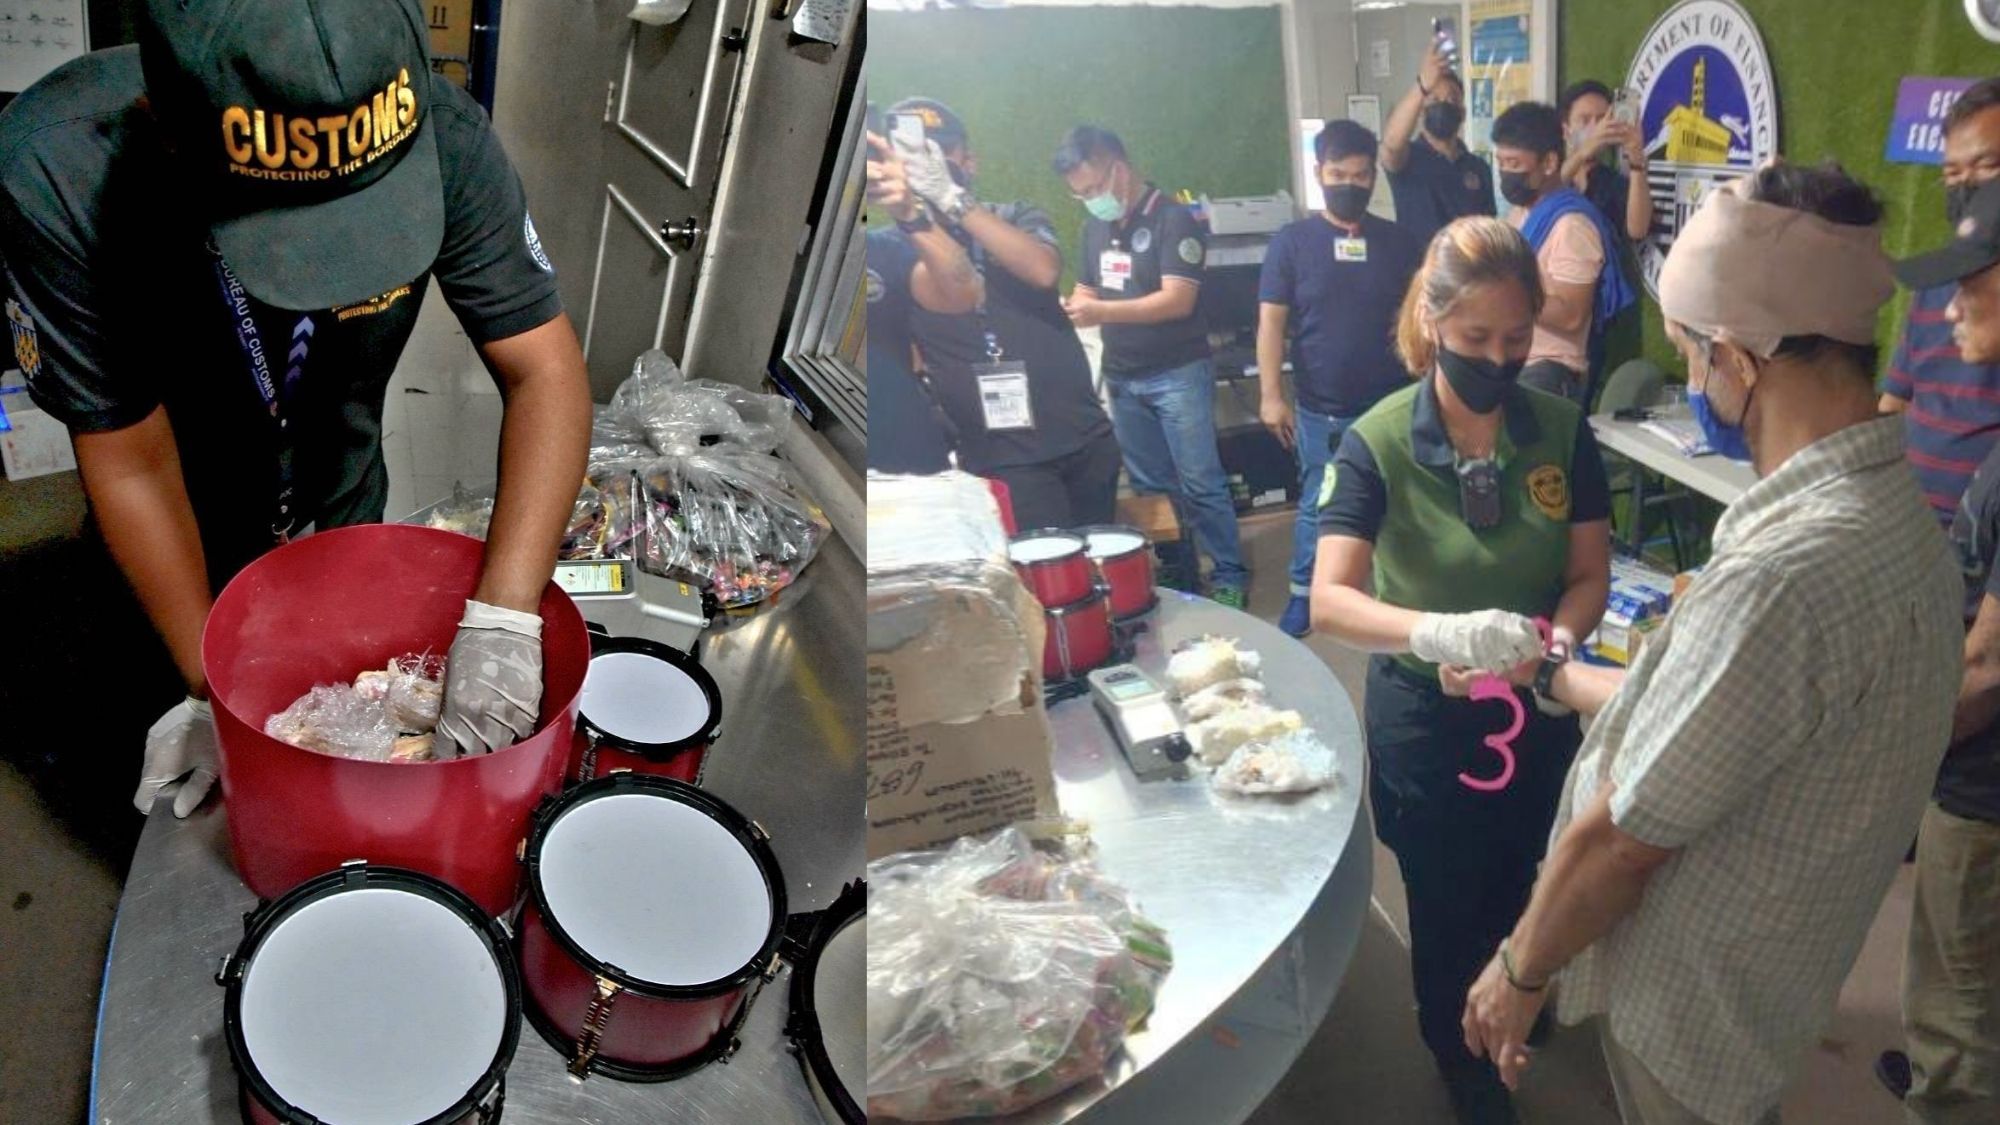 Claimants arrested over drugs hidden in toy drums package photo BoC PH